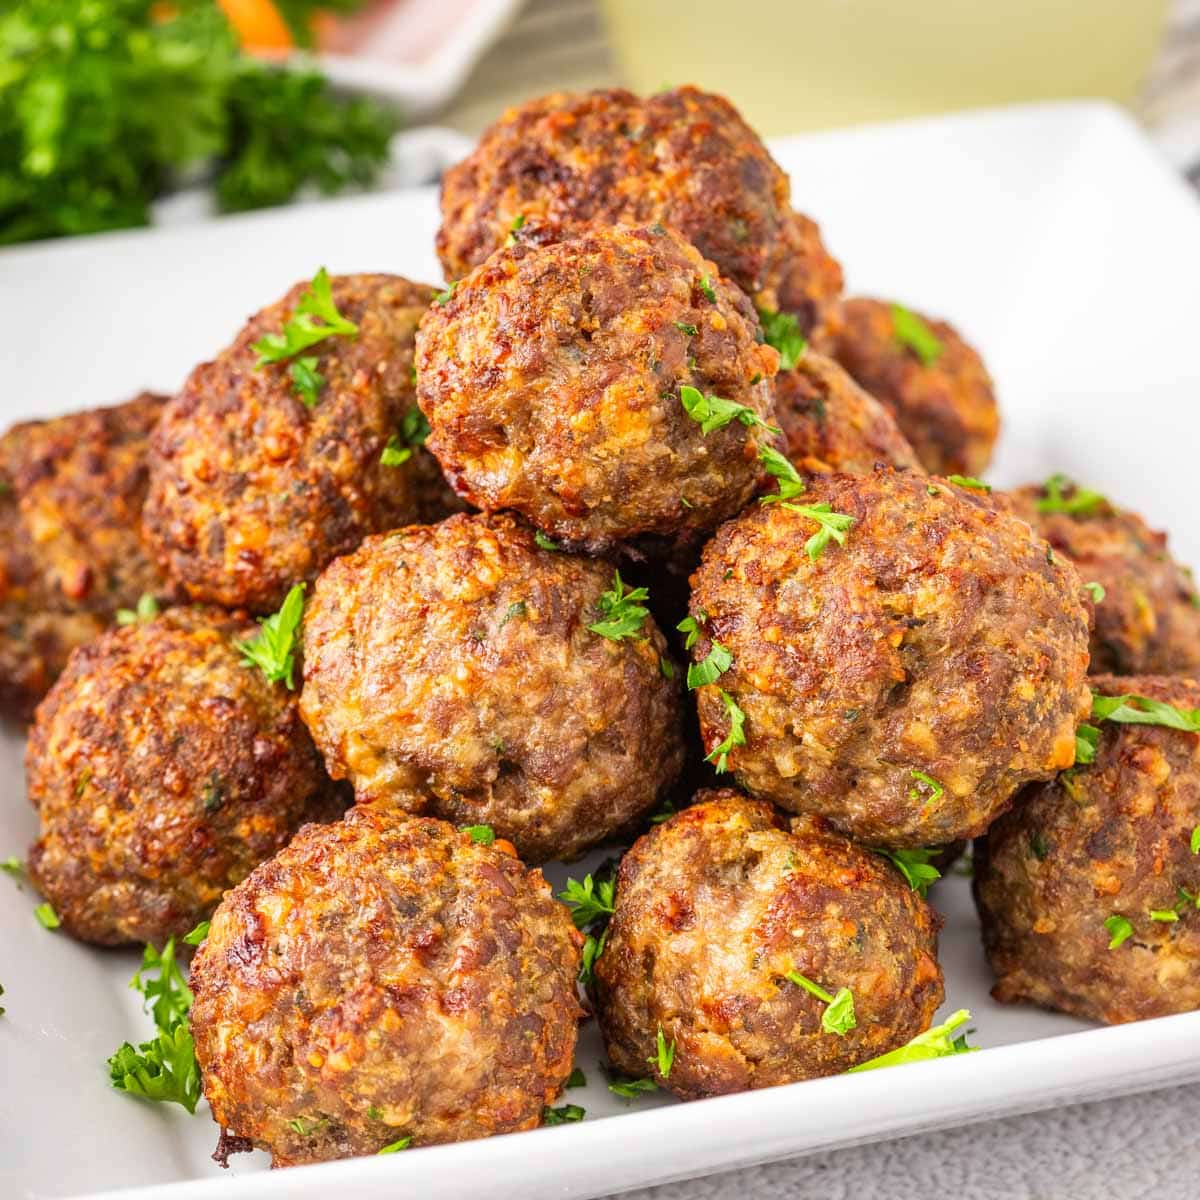 Air fryer meatballs on a white plate garnished with parsley.